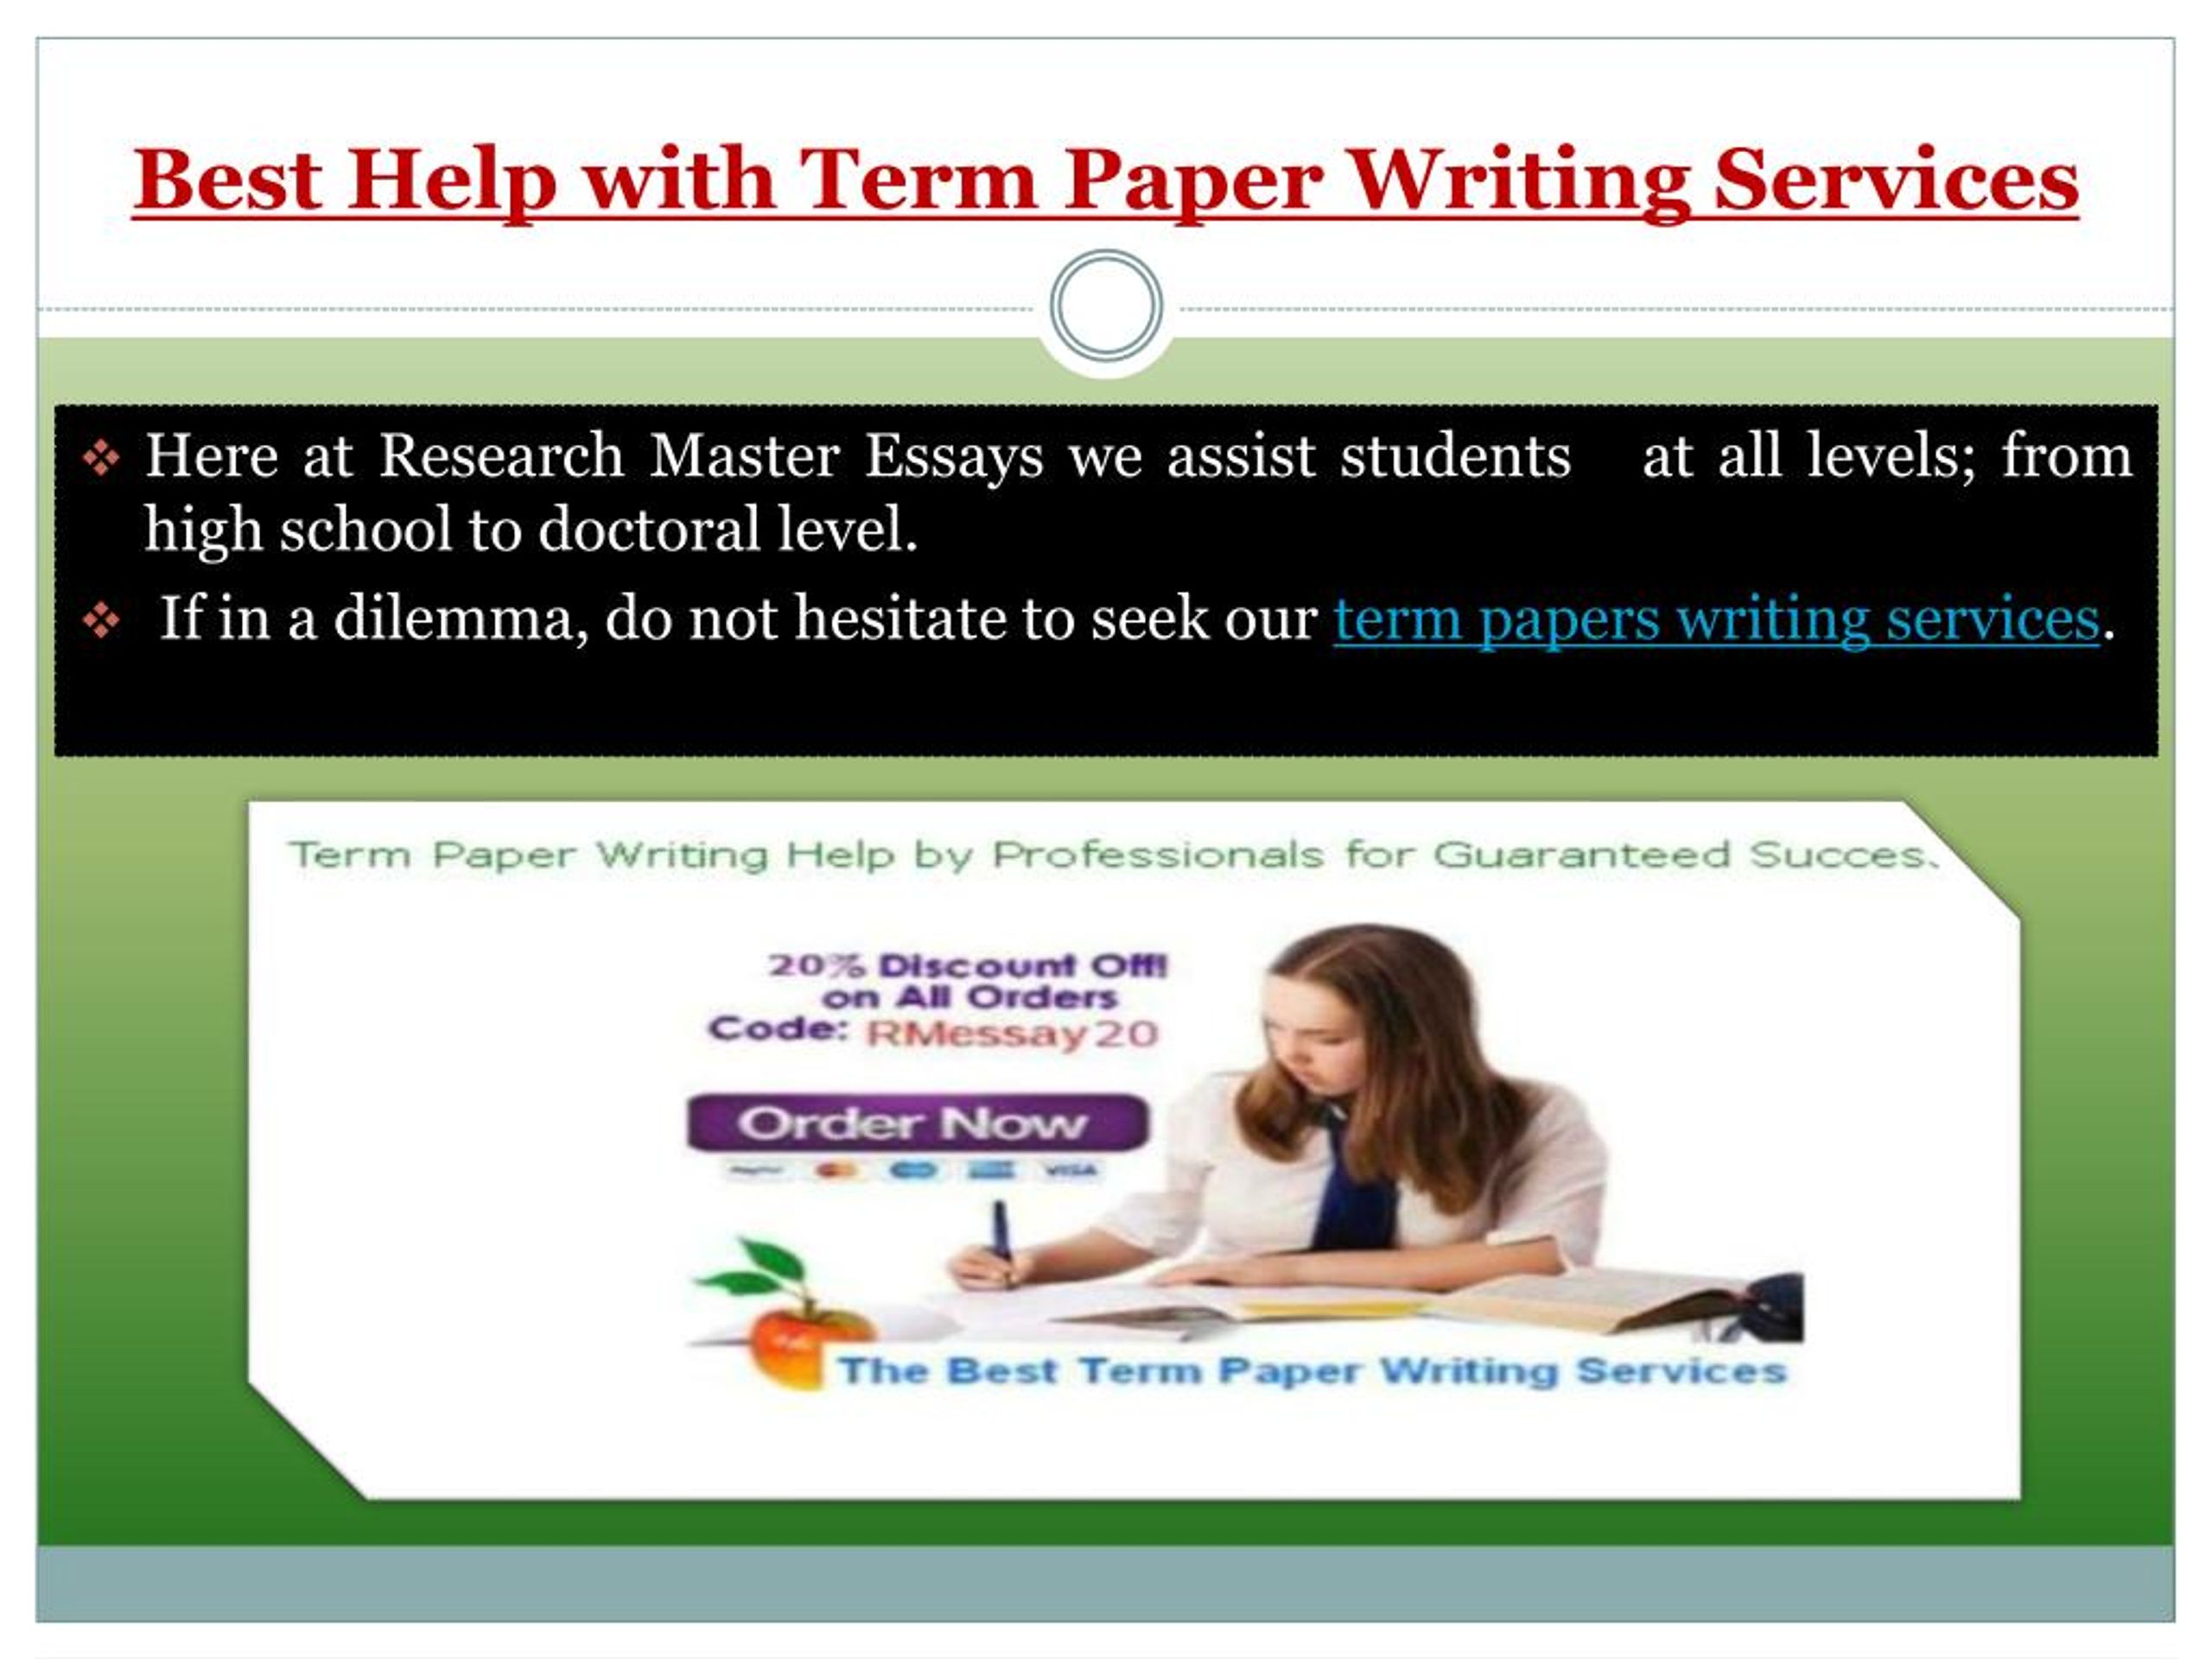 Master level writing services